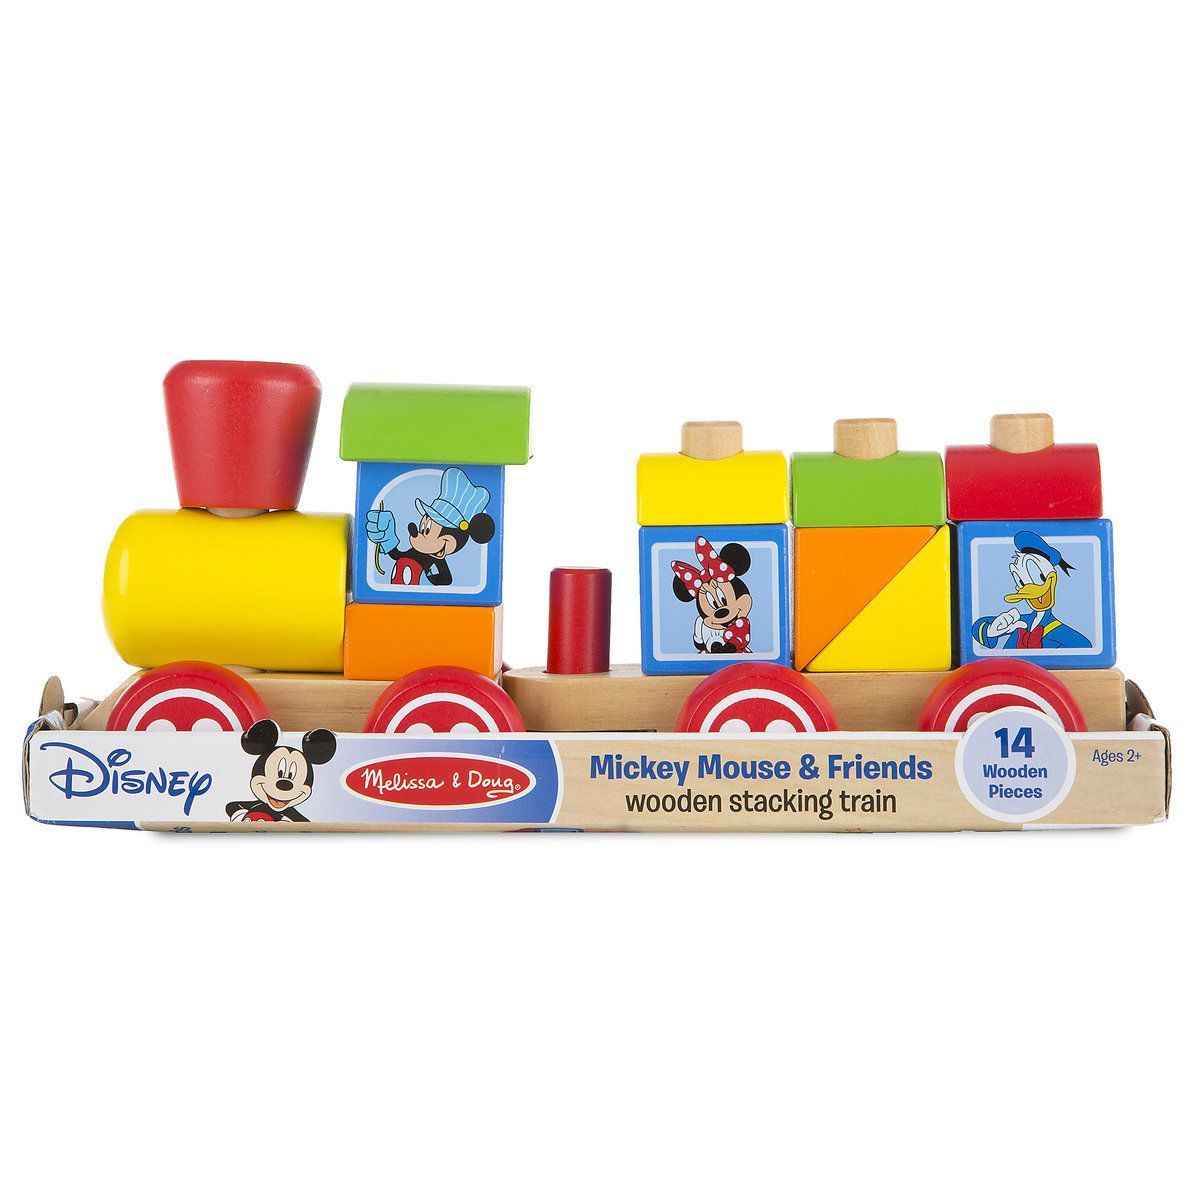 7. Mickey Mouse and Friends Wooden Stacking Train